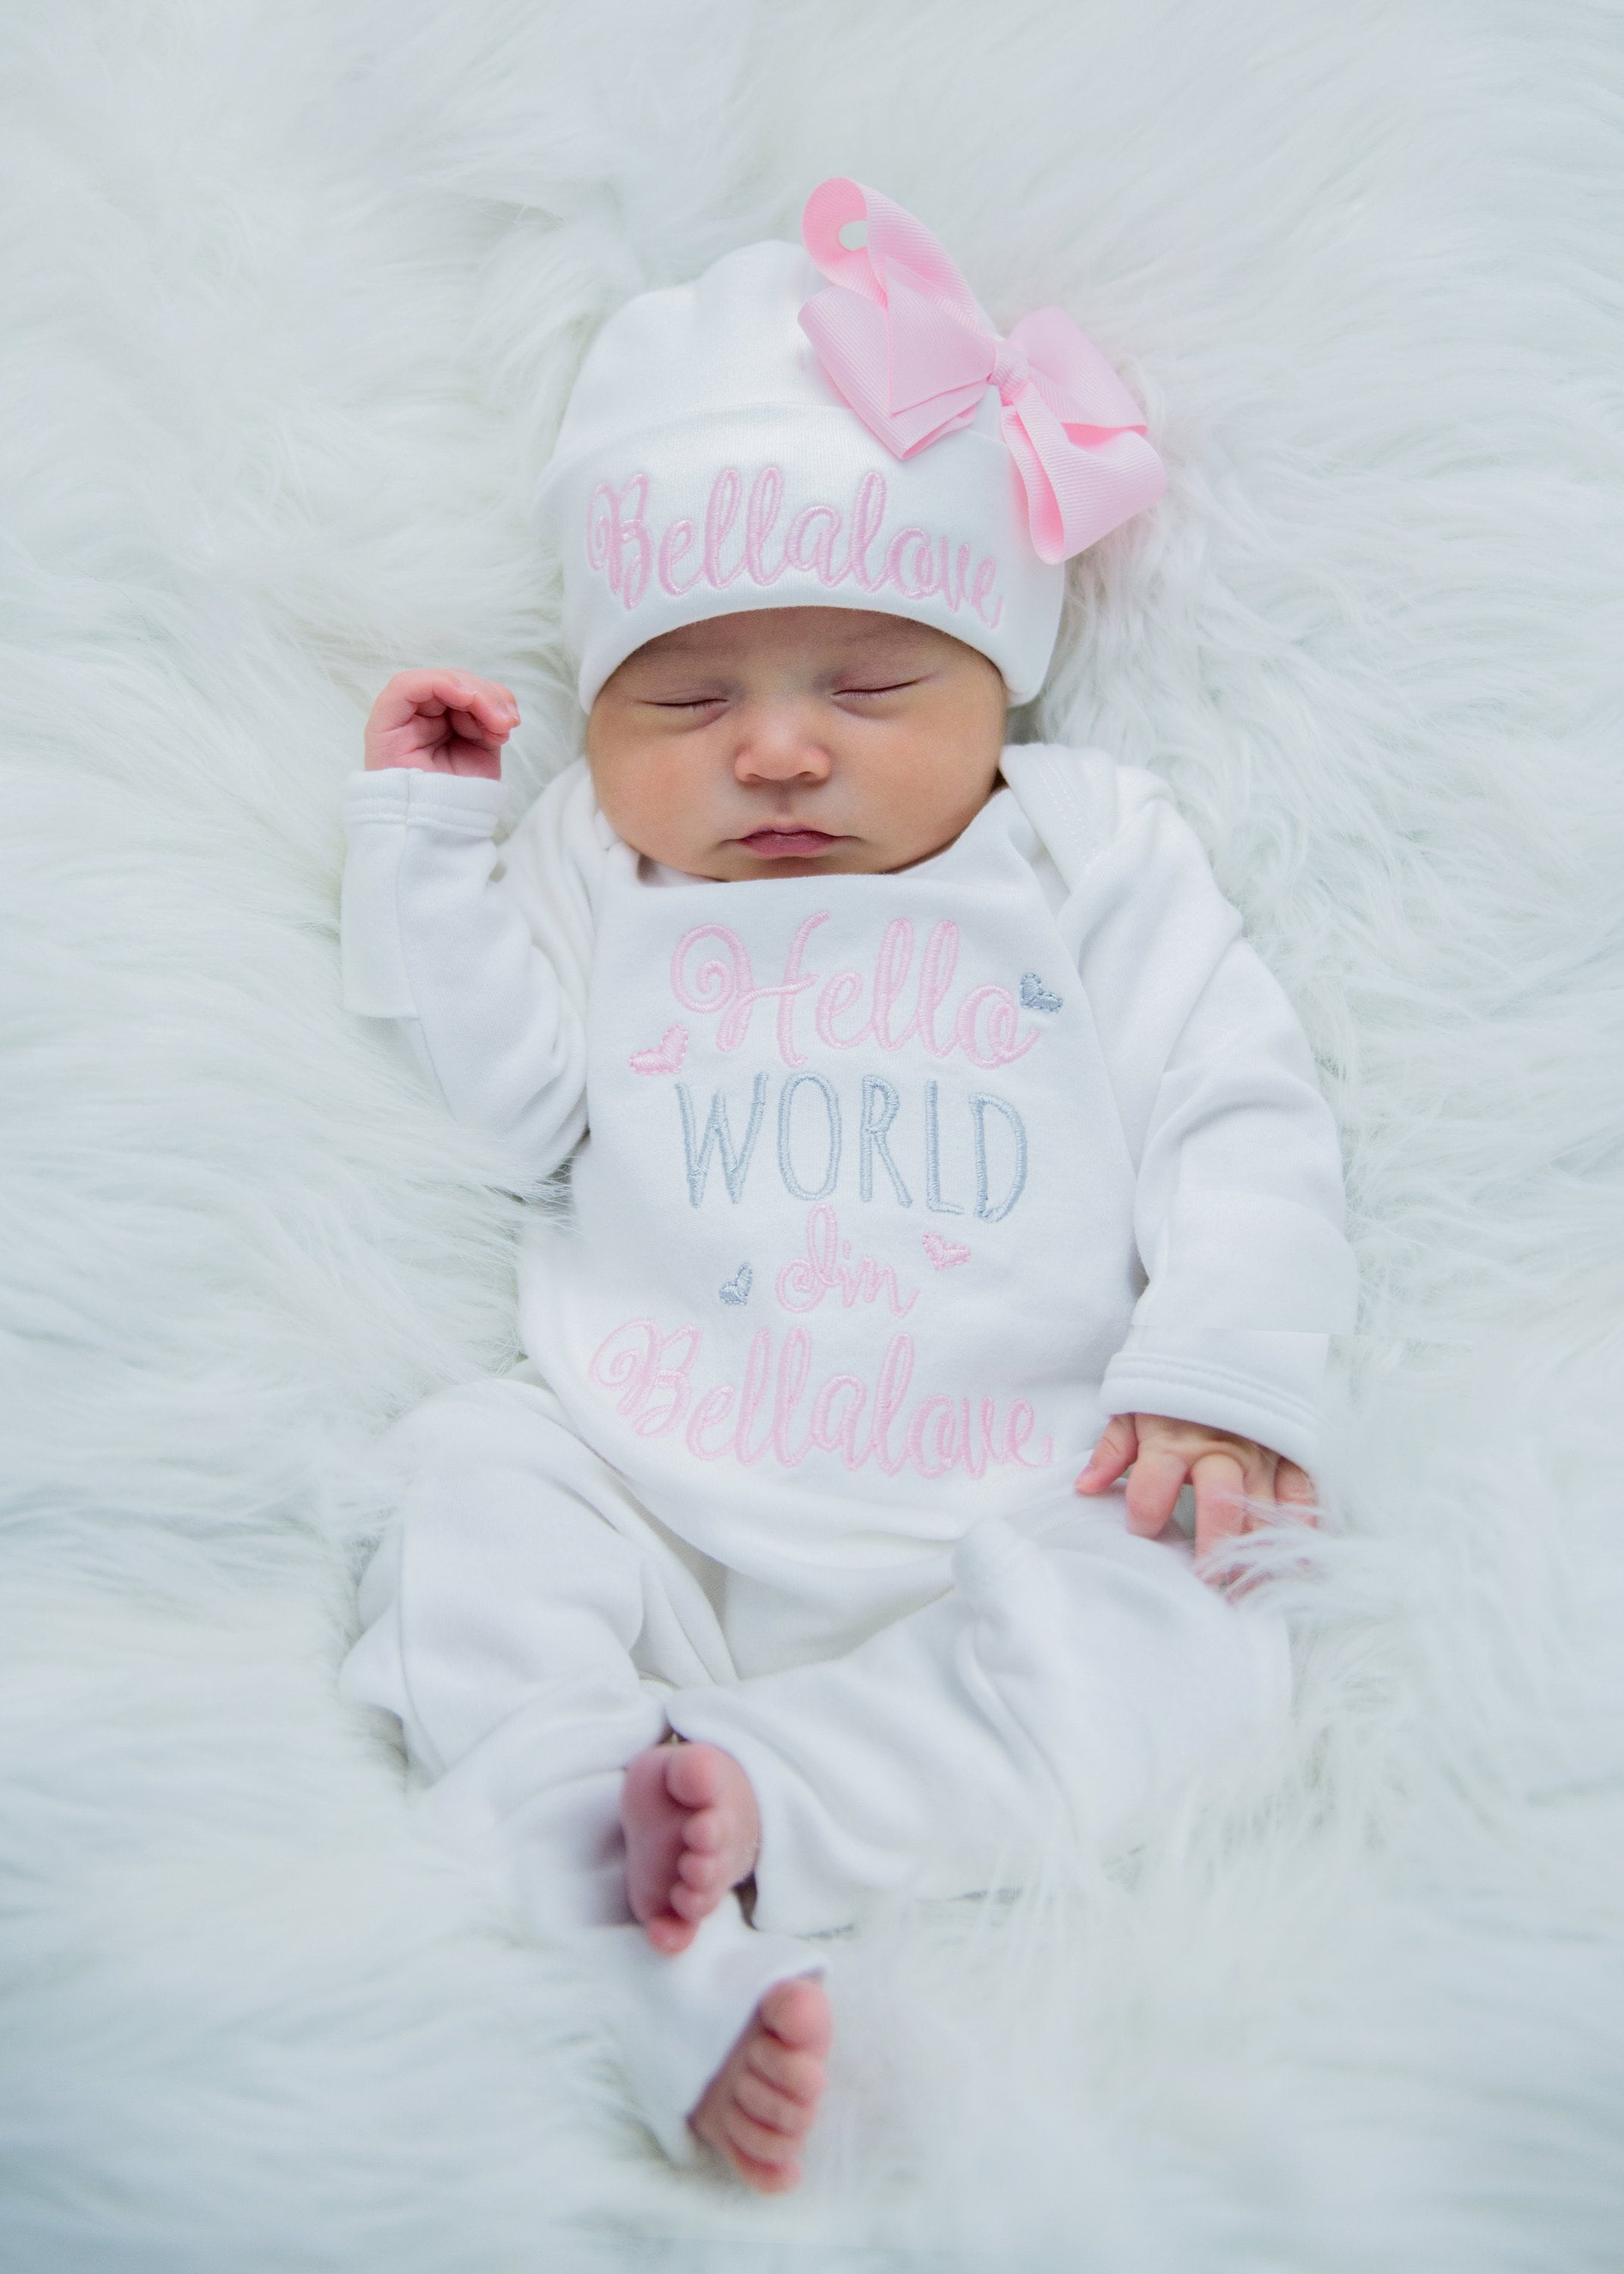 Baby Girl Gift Baby Girl Clothes Baby Girl Coming Home Outfit Baby Girl  Personalized Gift Newborn Girl Clothes Baby Shower Gift 